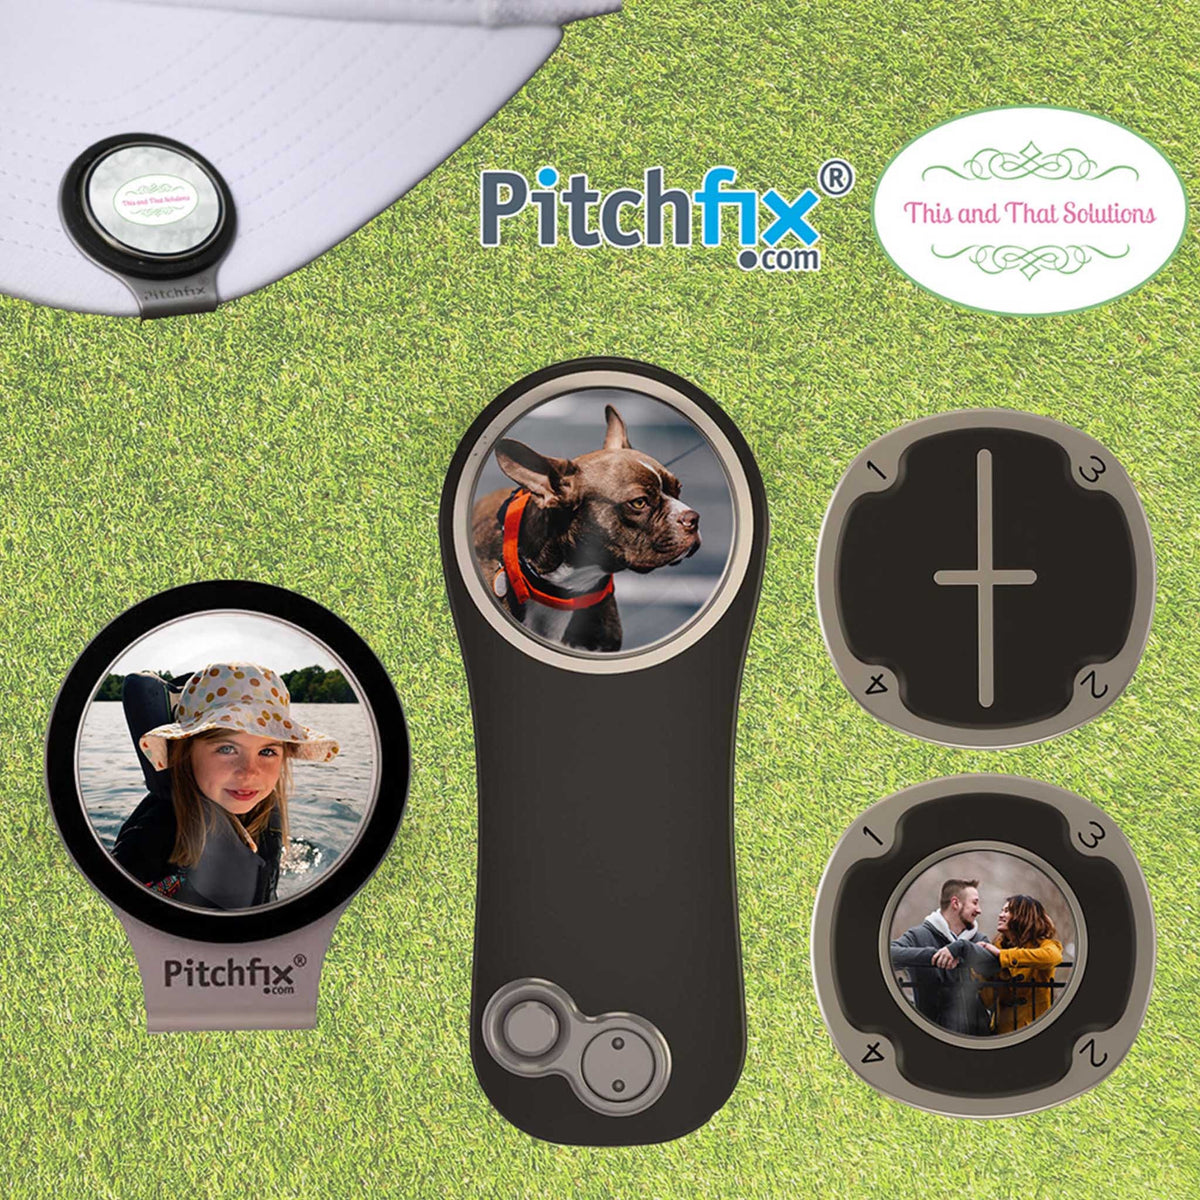 Personalized PitchFix MultiMarker Tool | Custom Ball Markers | Golf Gifts | Company Logo